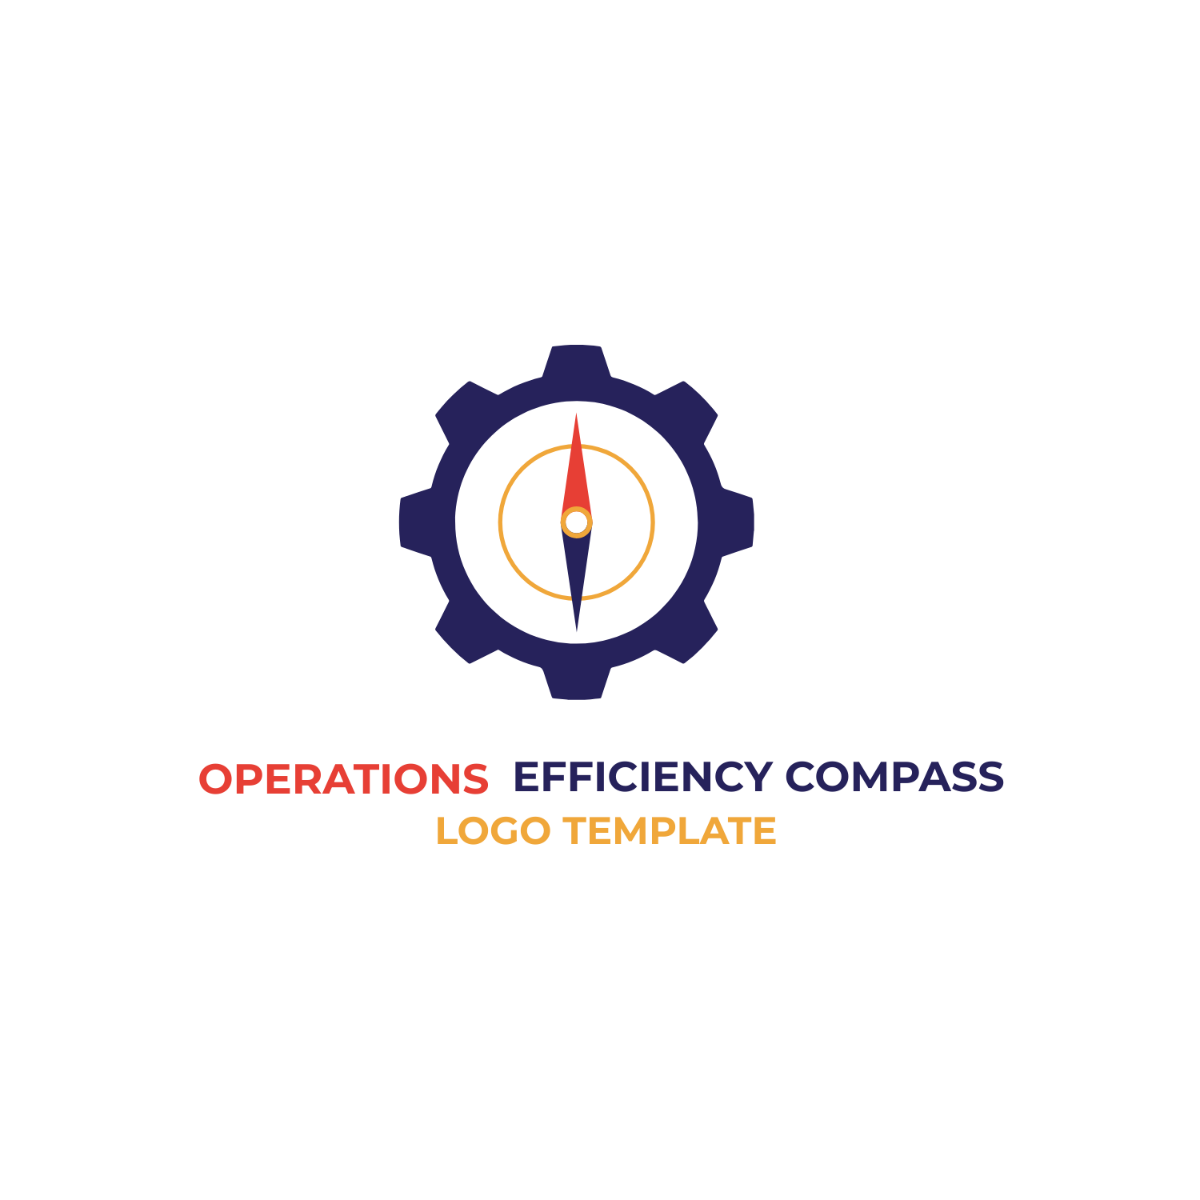 Operations Efficiency Compass Logo Template